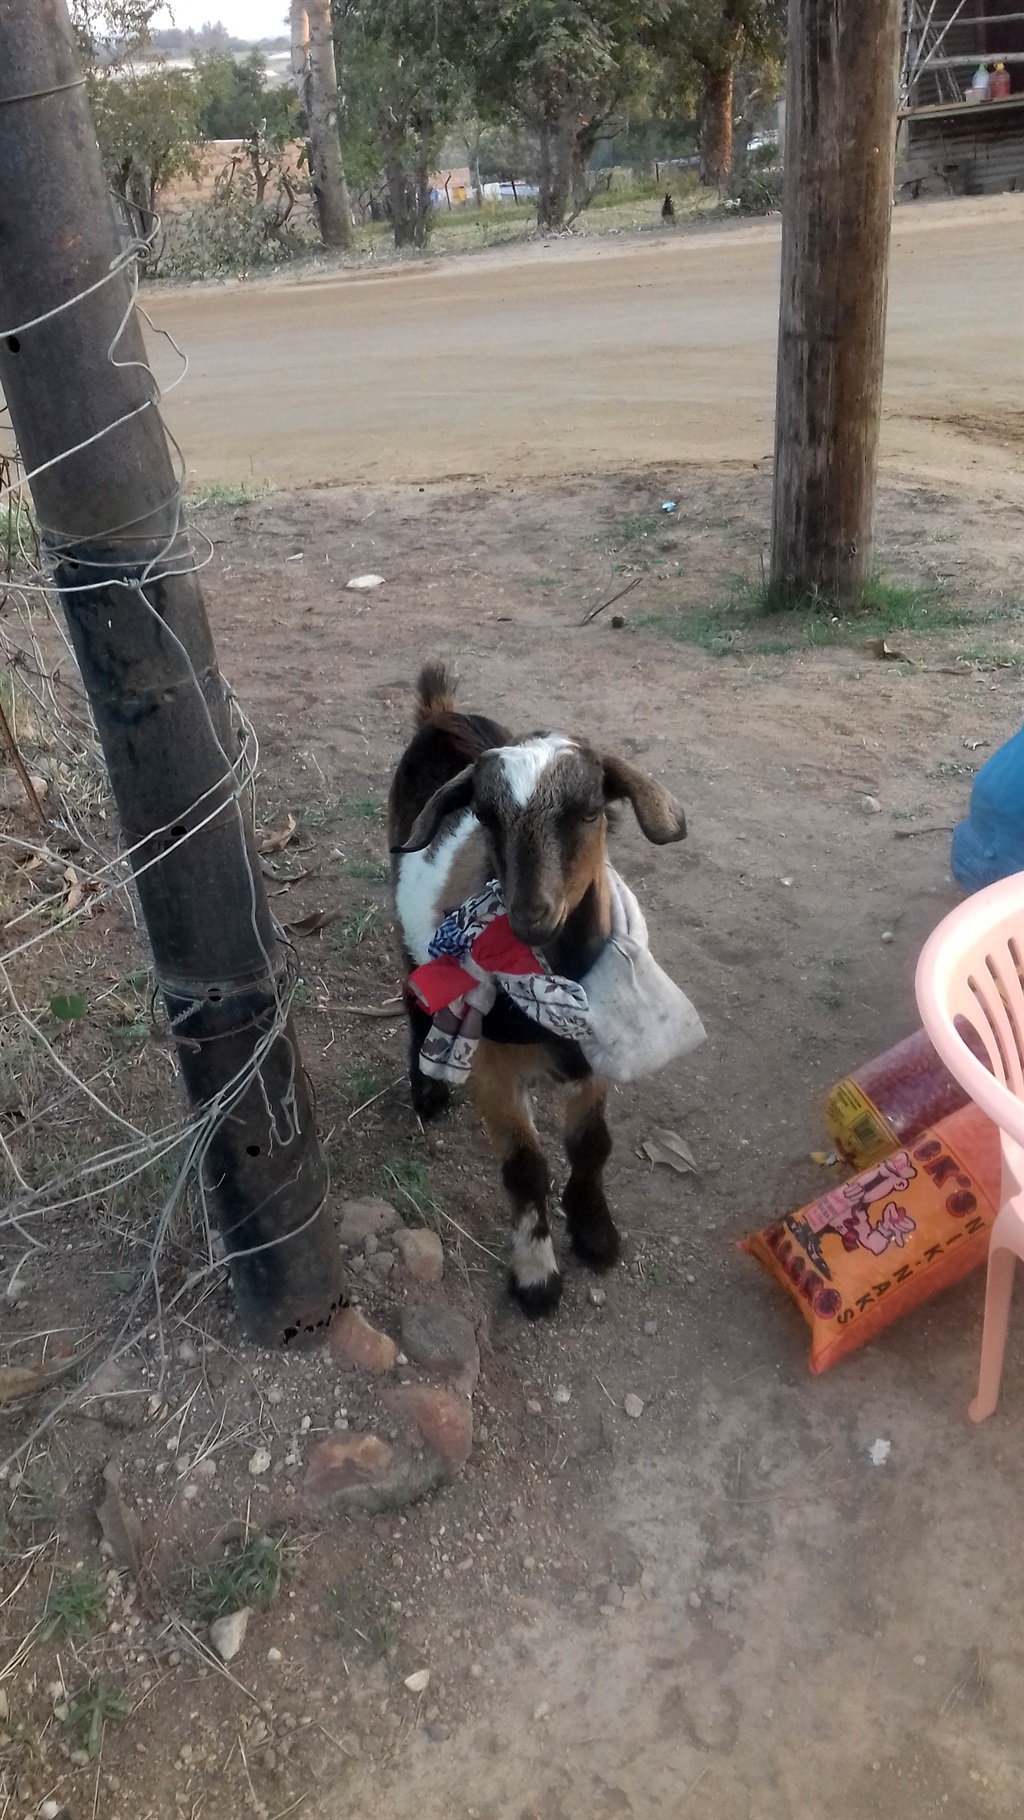 This goat roams the streets of New Forest Village in Mpumalanga. Photo by Oris Mnisi